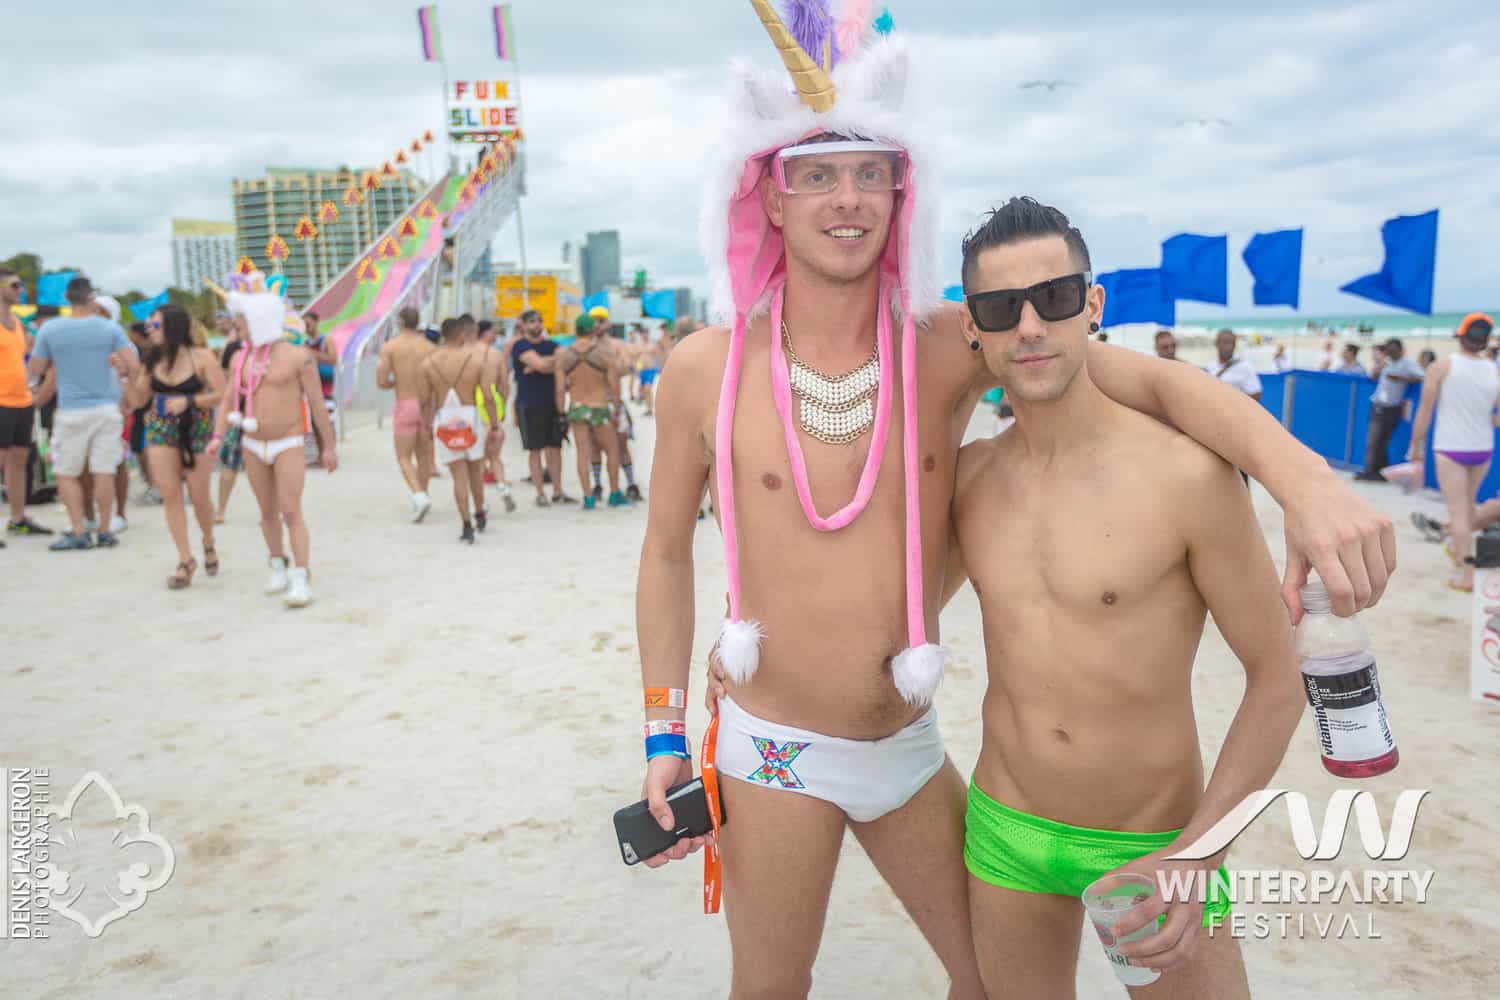 Two men embracing on the beach during the Miami Winter Party Festival, symbolizing love and unity amidst the celebration of diversity.